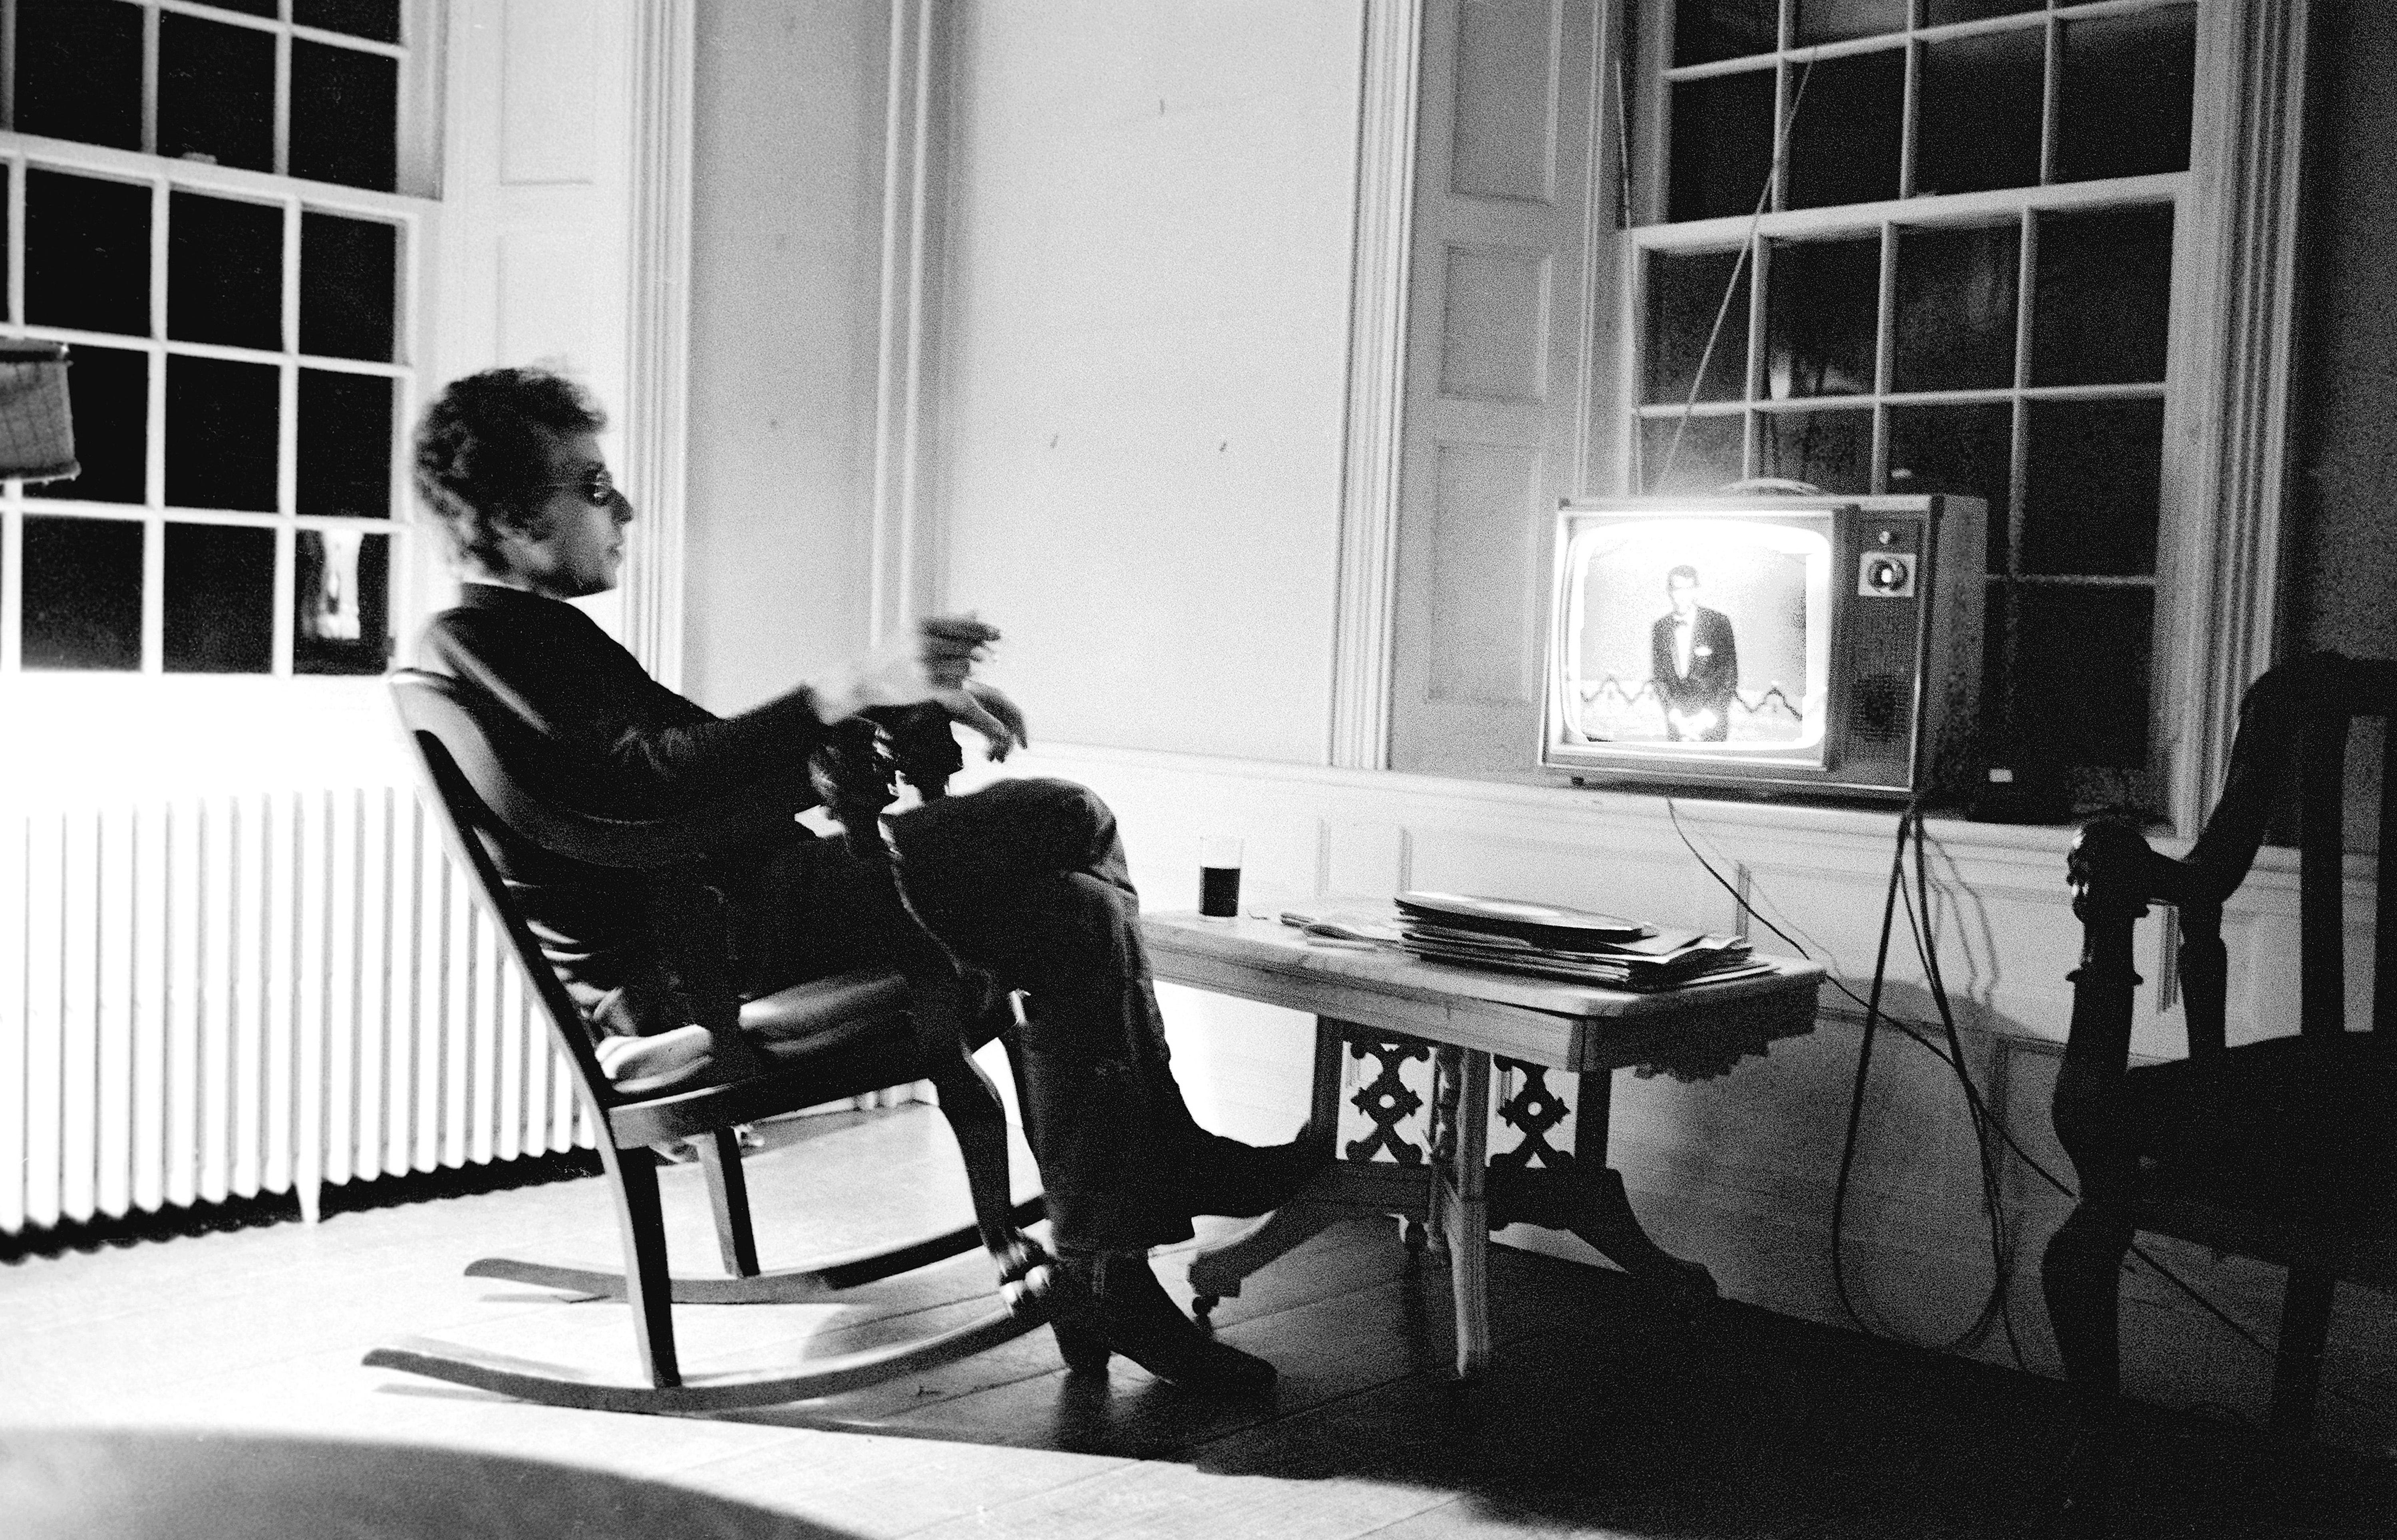 Bob Dylan watches Dean Martin at night, at home in Woodstock, NY, in 1964.